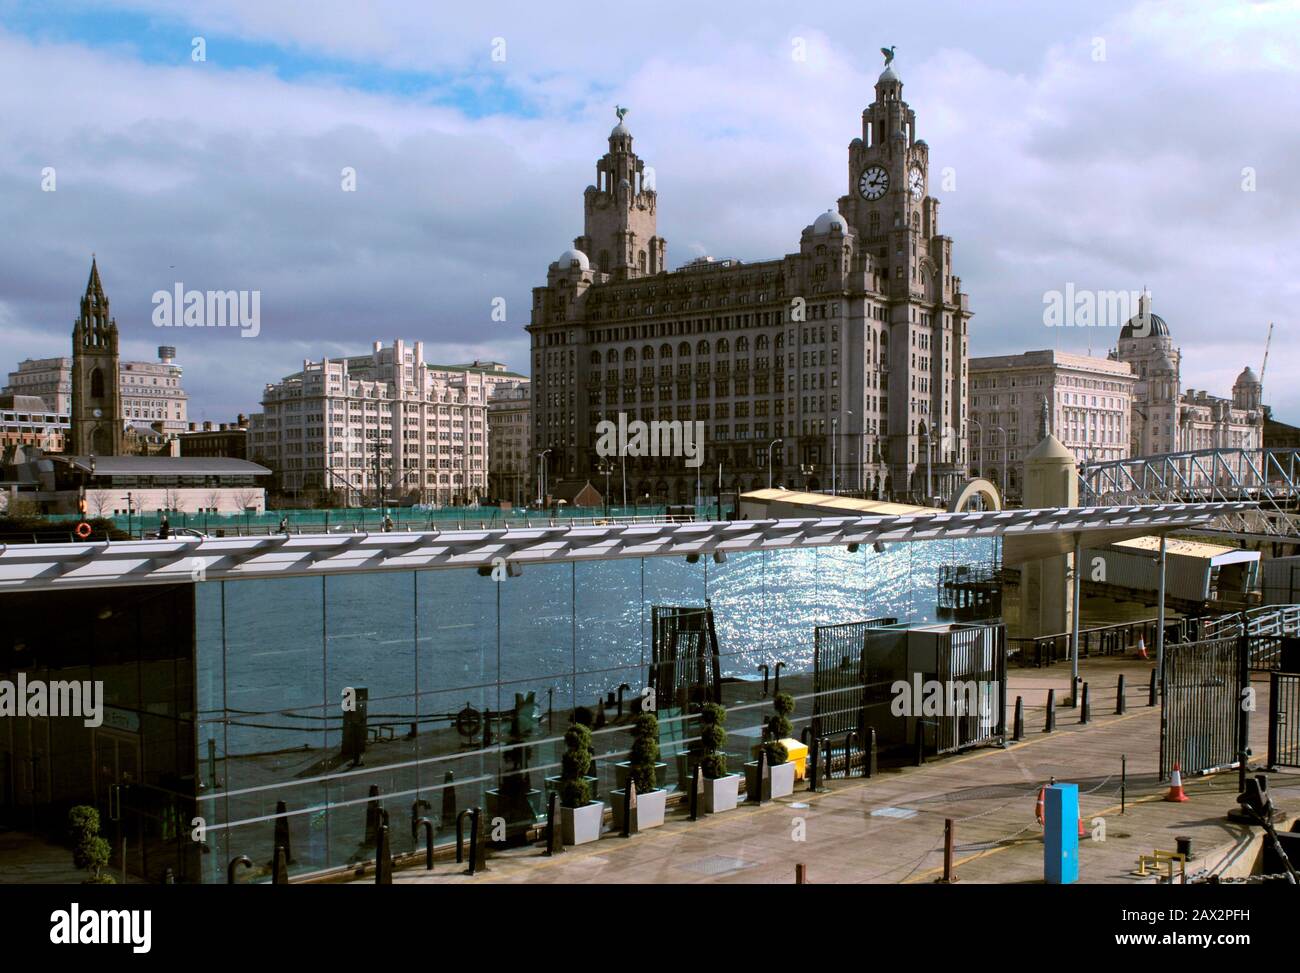 AJAXNETPHOTO. 2012. LIVERPOOL, ENGLAND. - LIVERPOOL ROYAL LIVER, CUNARD AND PORT AUTHORITY BUILDINGS SEEN FROM NEW CRUISE TERMINAL. PHOTO: JONATHAN EASTLAND/AJAX REF: D2X122902 2106 Stock Photo